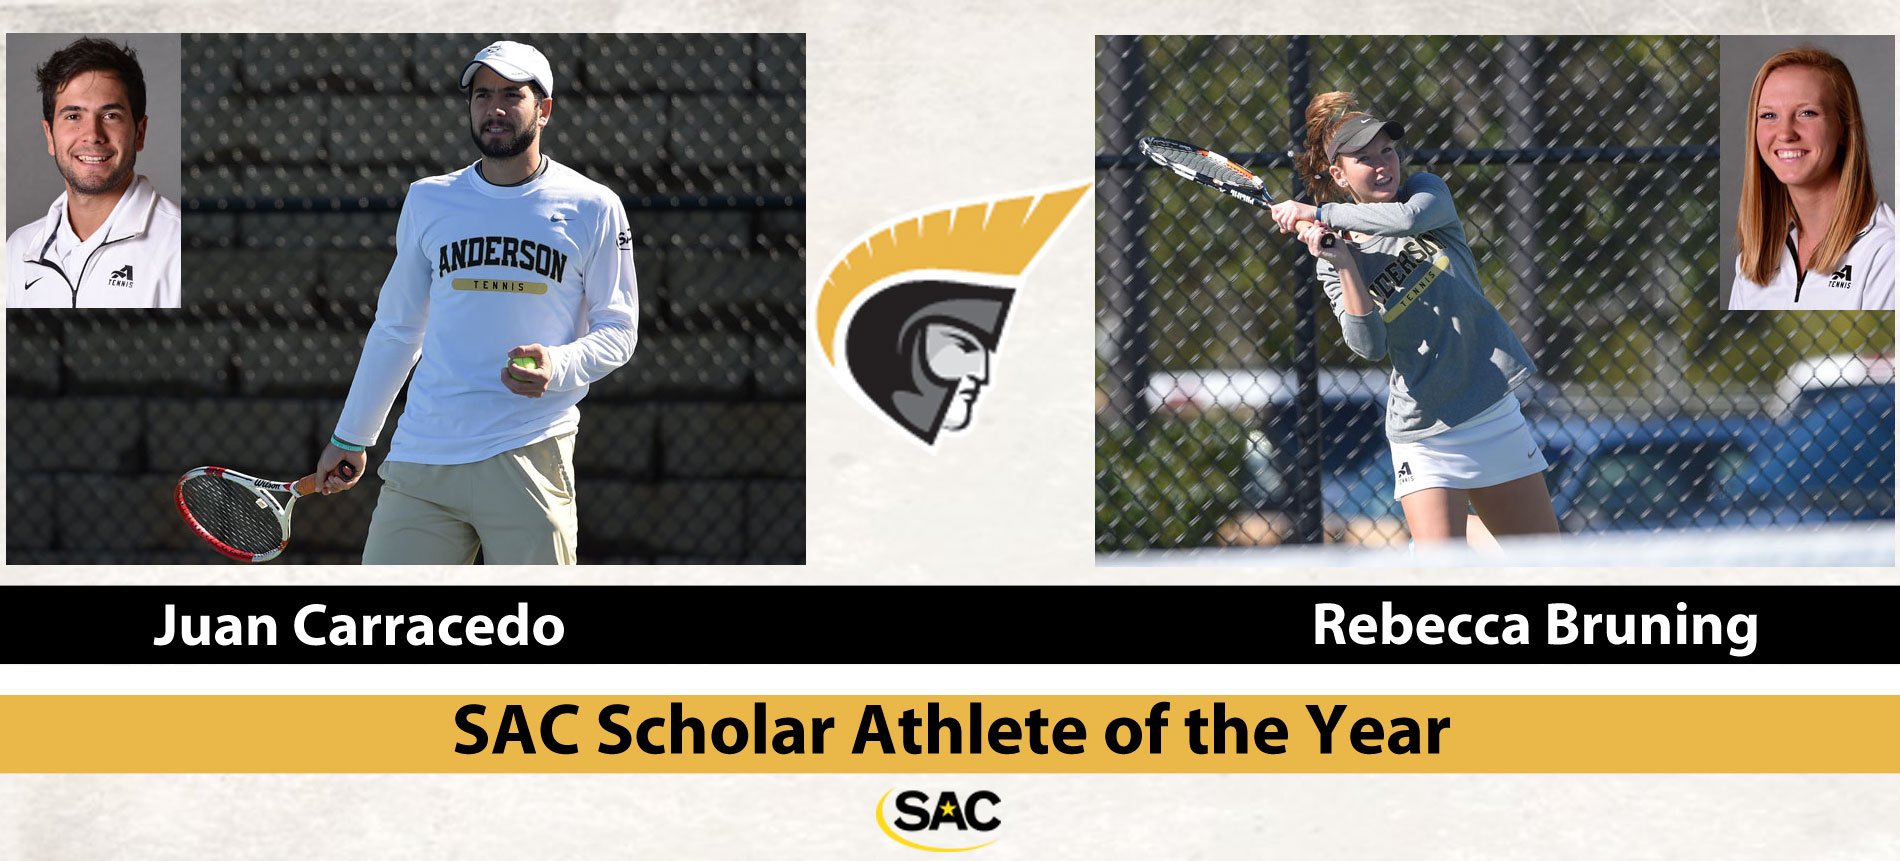 Carracedo and Bruning Earn SAC Scholar Tennis Athlete of the Year